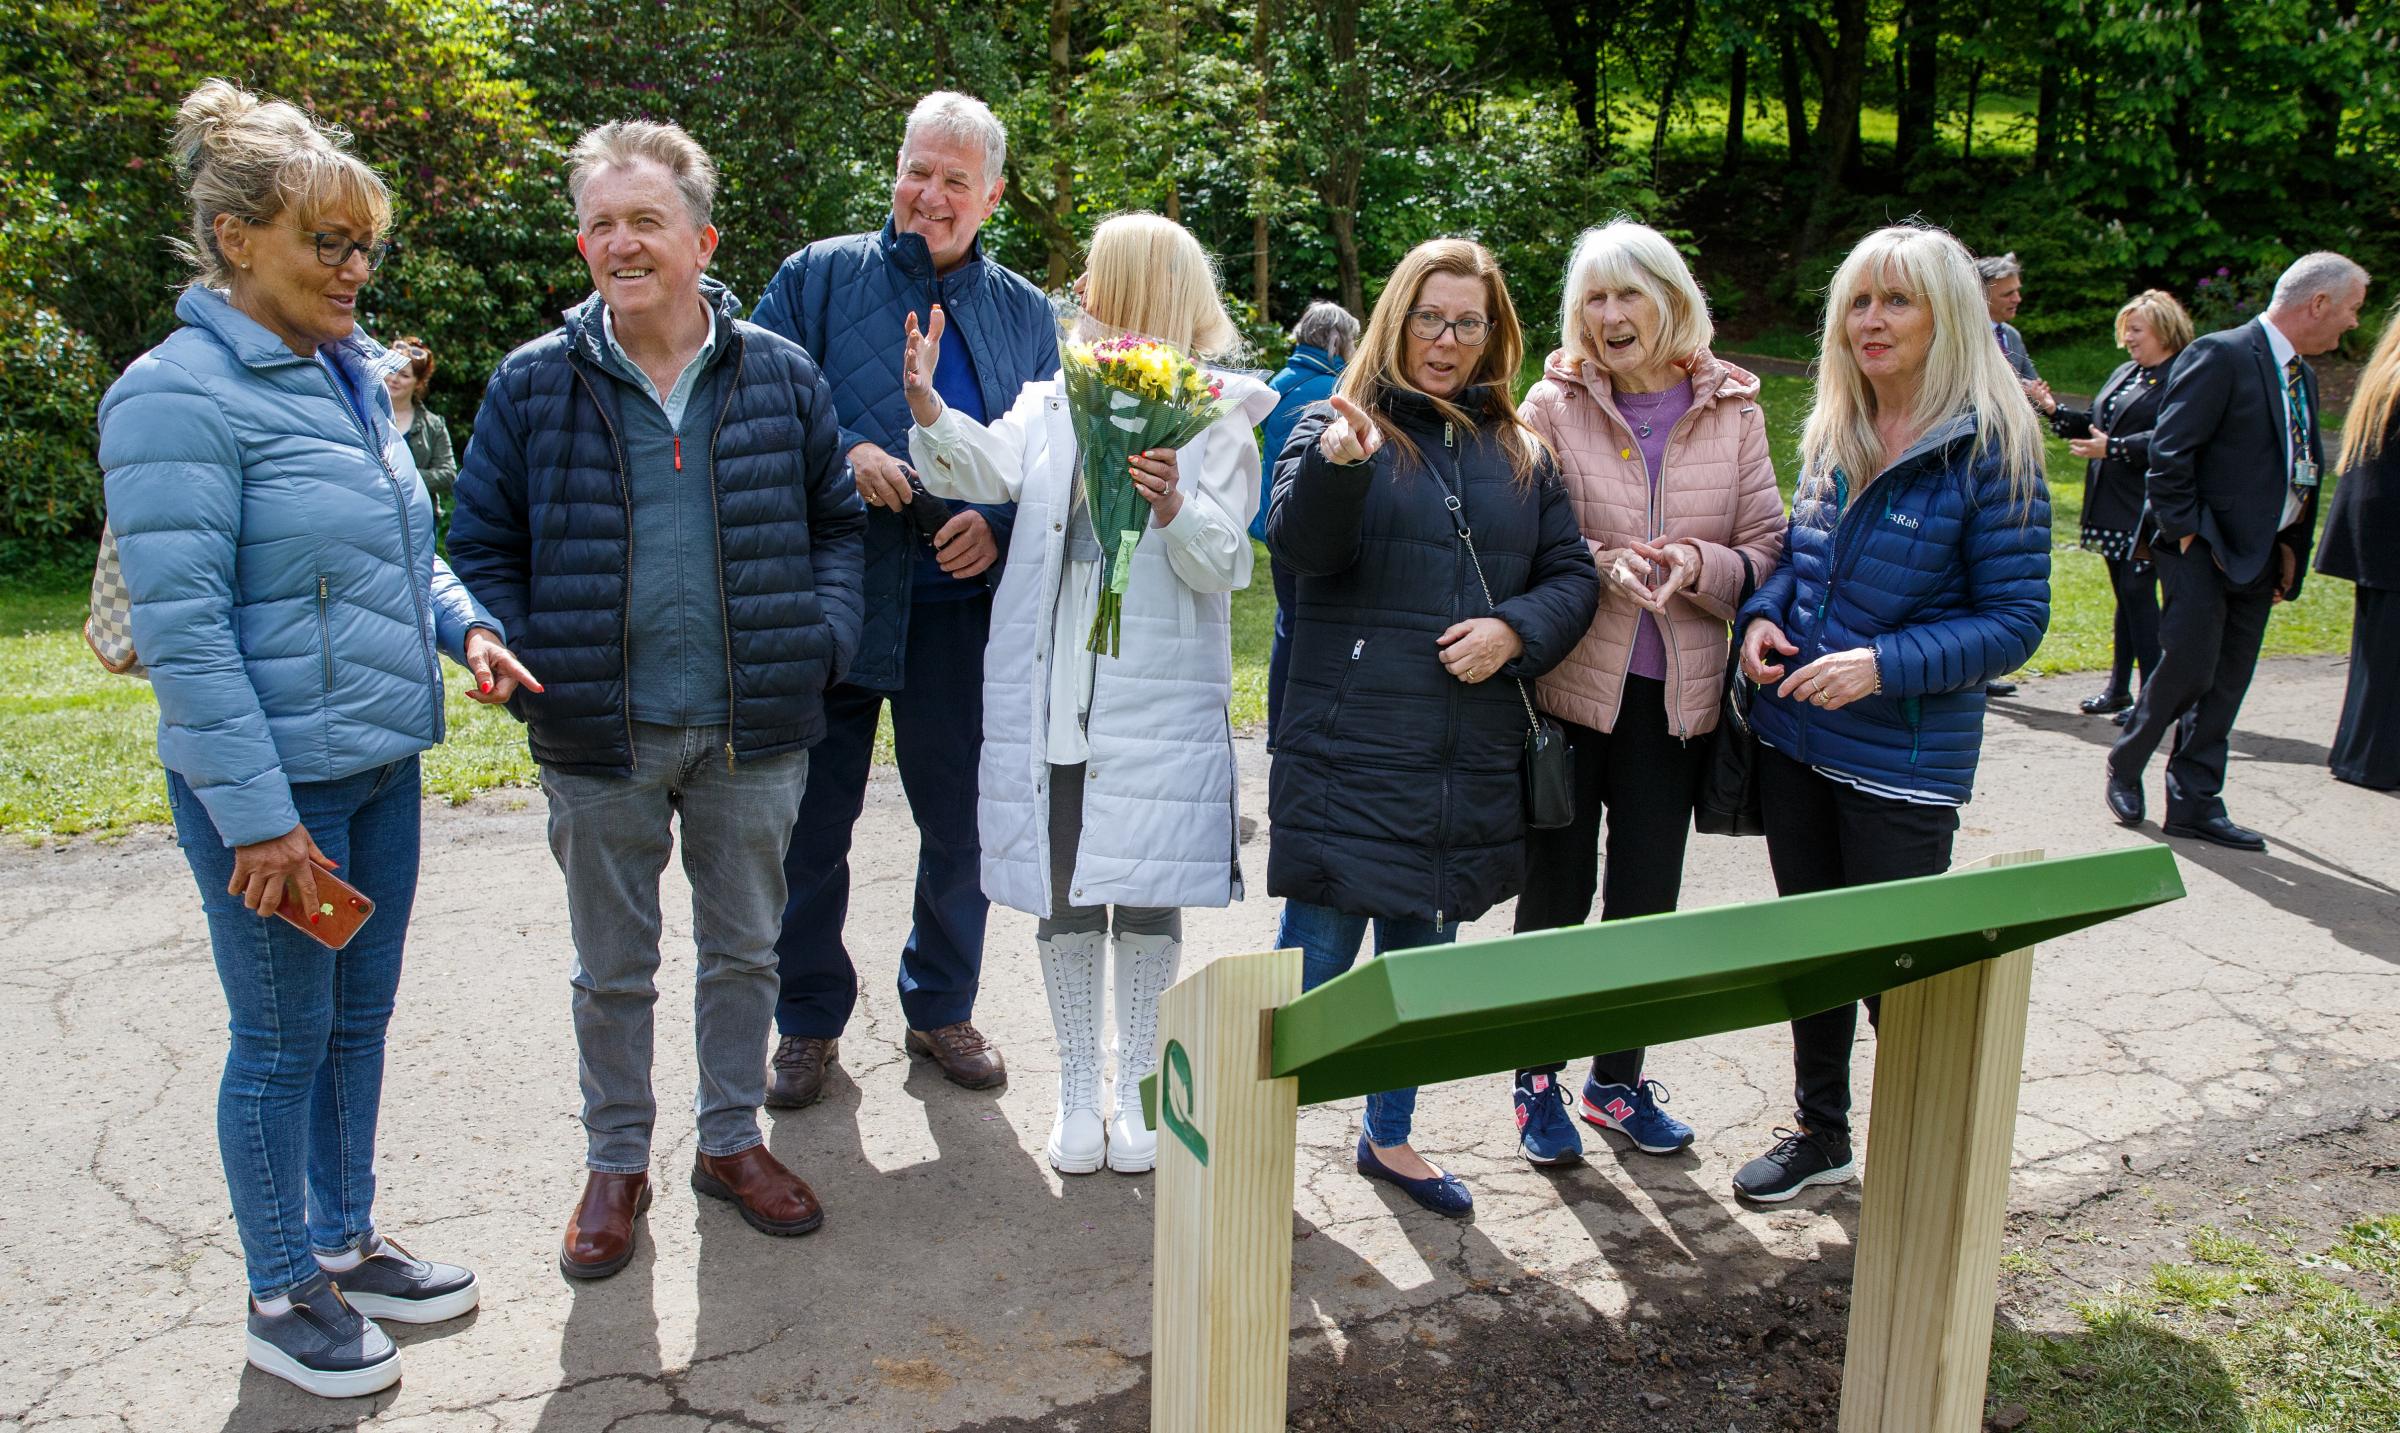 Opening of The Herald I Remember national Covid memorial at Pollok country park. People pictured at Birch grove in Pollok Country Park. Birch grove is one of the areas in the park where artist Alec Finlay has installed supports as part of the I Remember